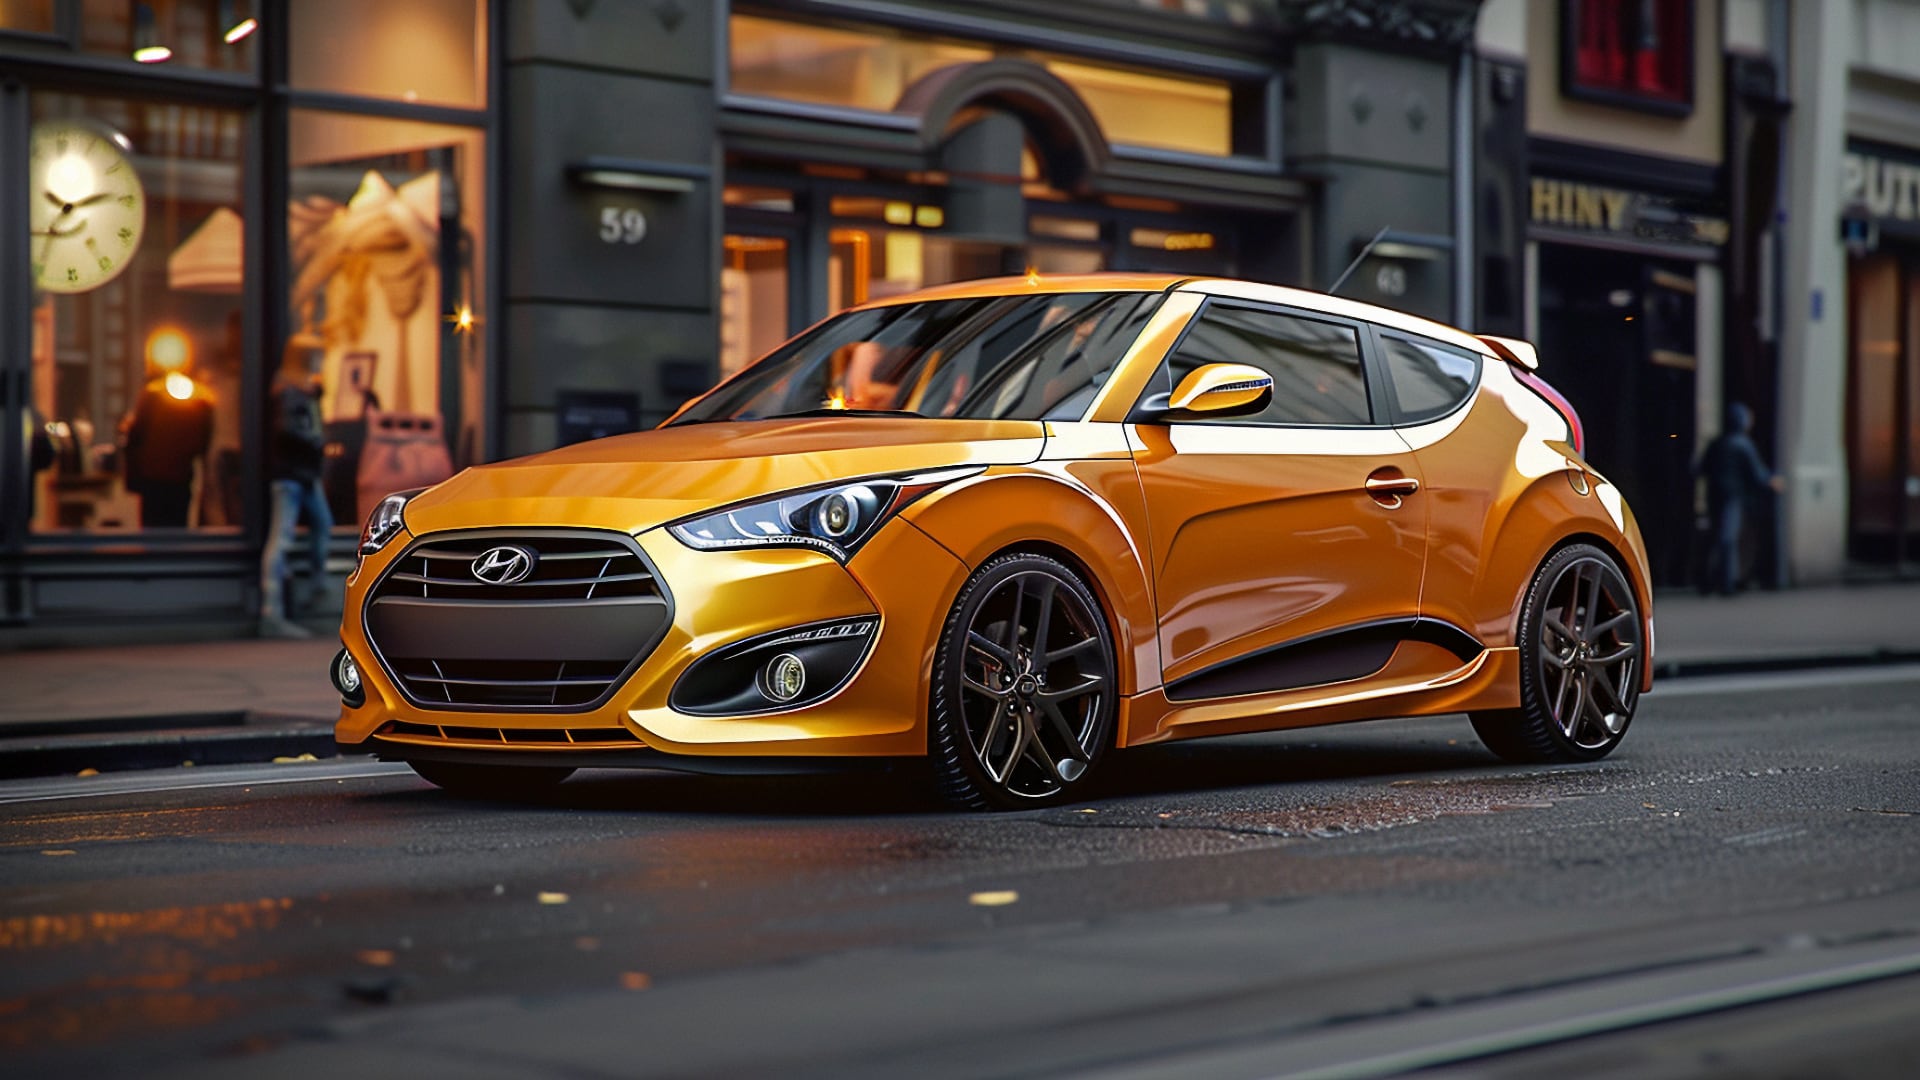 2019 Hyundai Veloster: years to avoid for Hyundai Veloster enthusiasts.